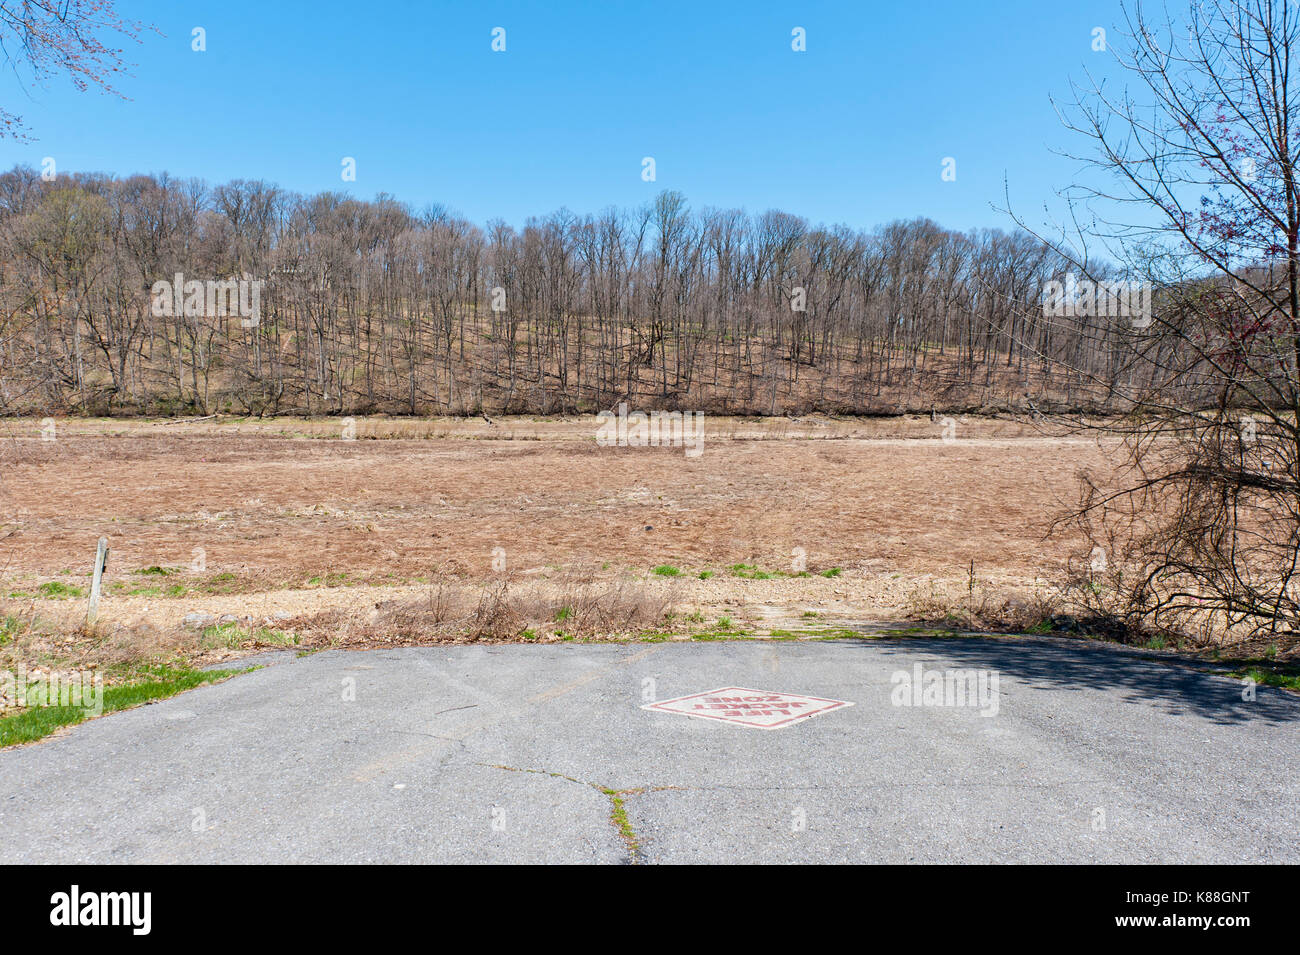 VIEW AROUND BOAT RAMP OF DRY LAKE BED AT SPEEDWELL FORGE LAKE AFTER DRAINING DUE TO DAM DAMAGE, LITITZ PENNSYLVANIA Stock Photo